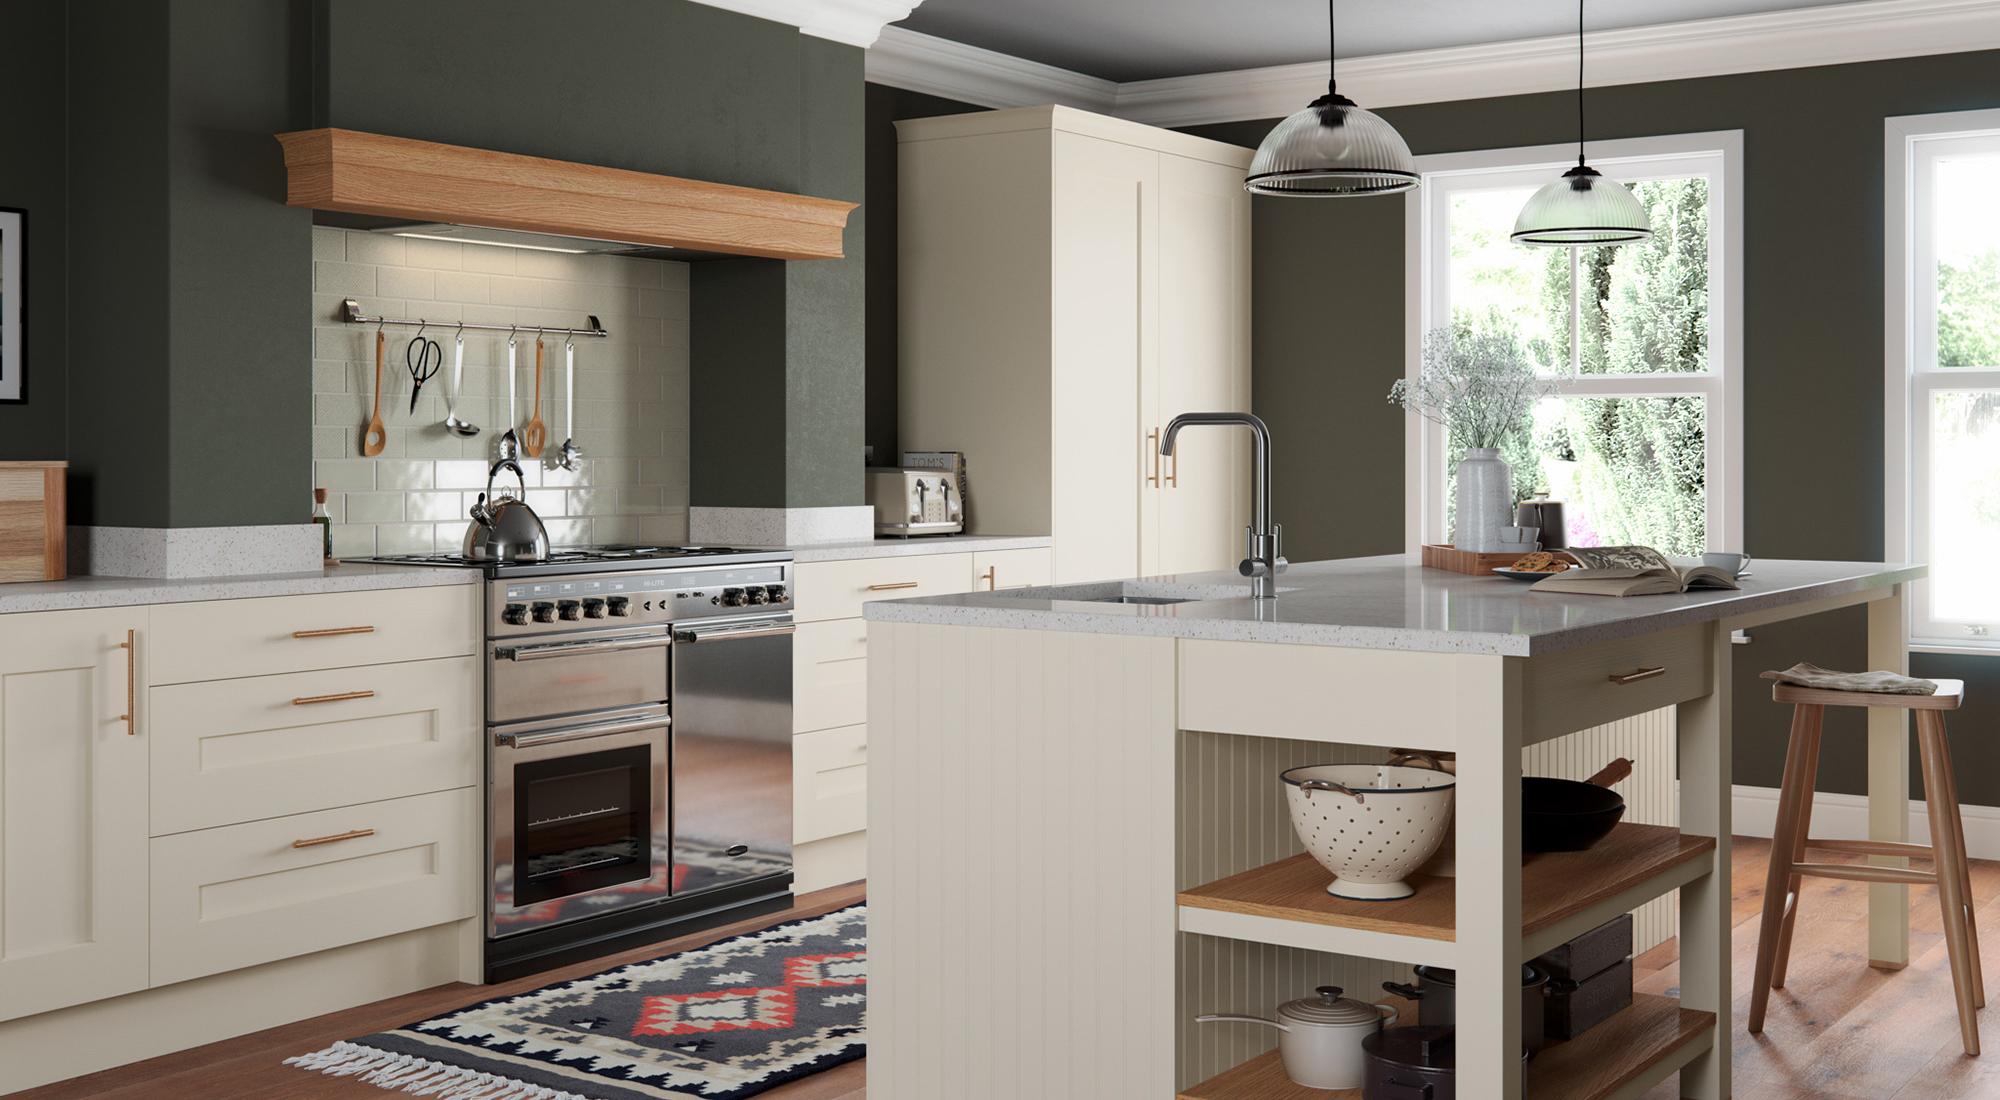 Lloyds Kitchens and Bedrooms | Stockport, Cheshire